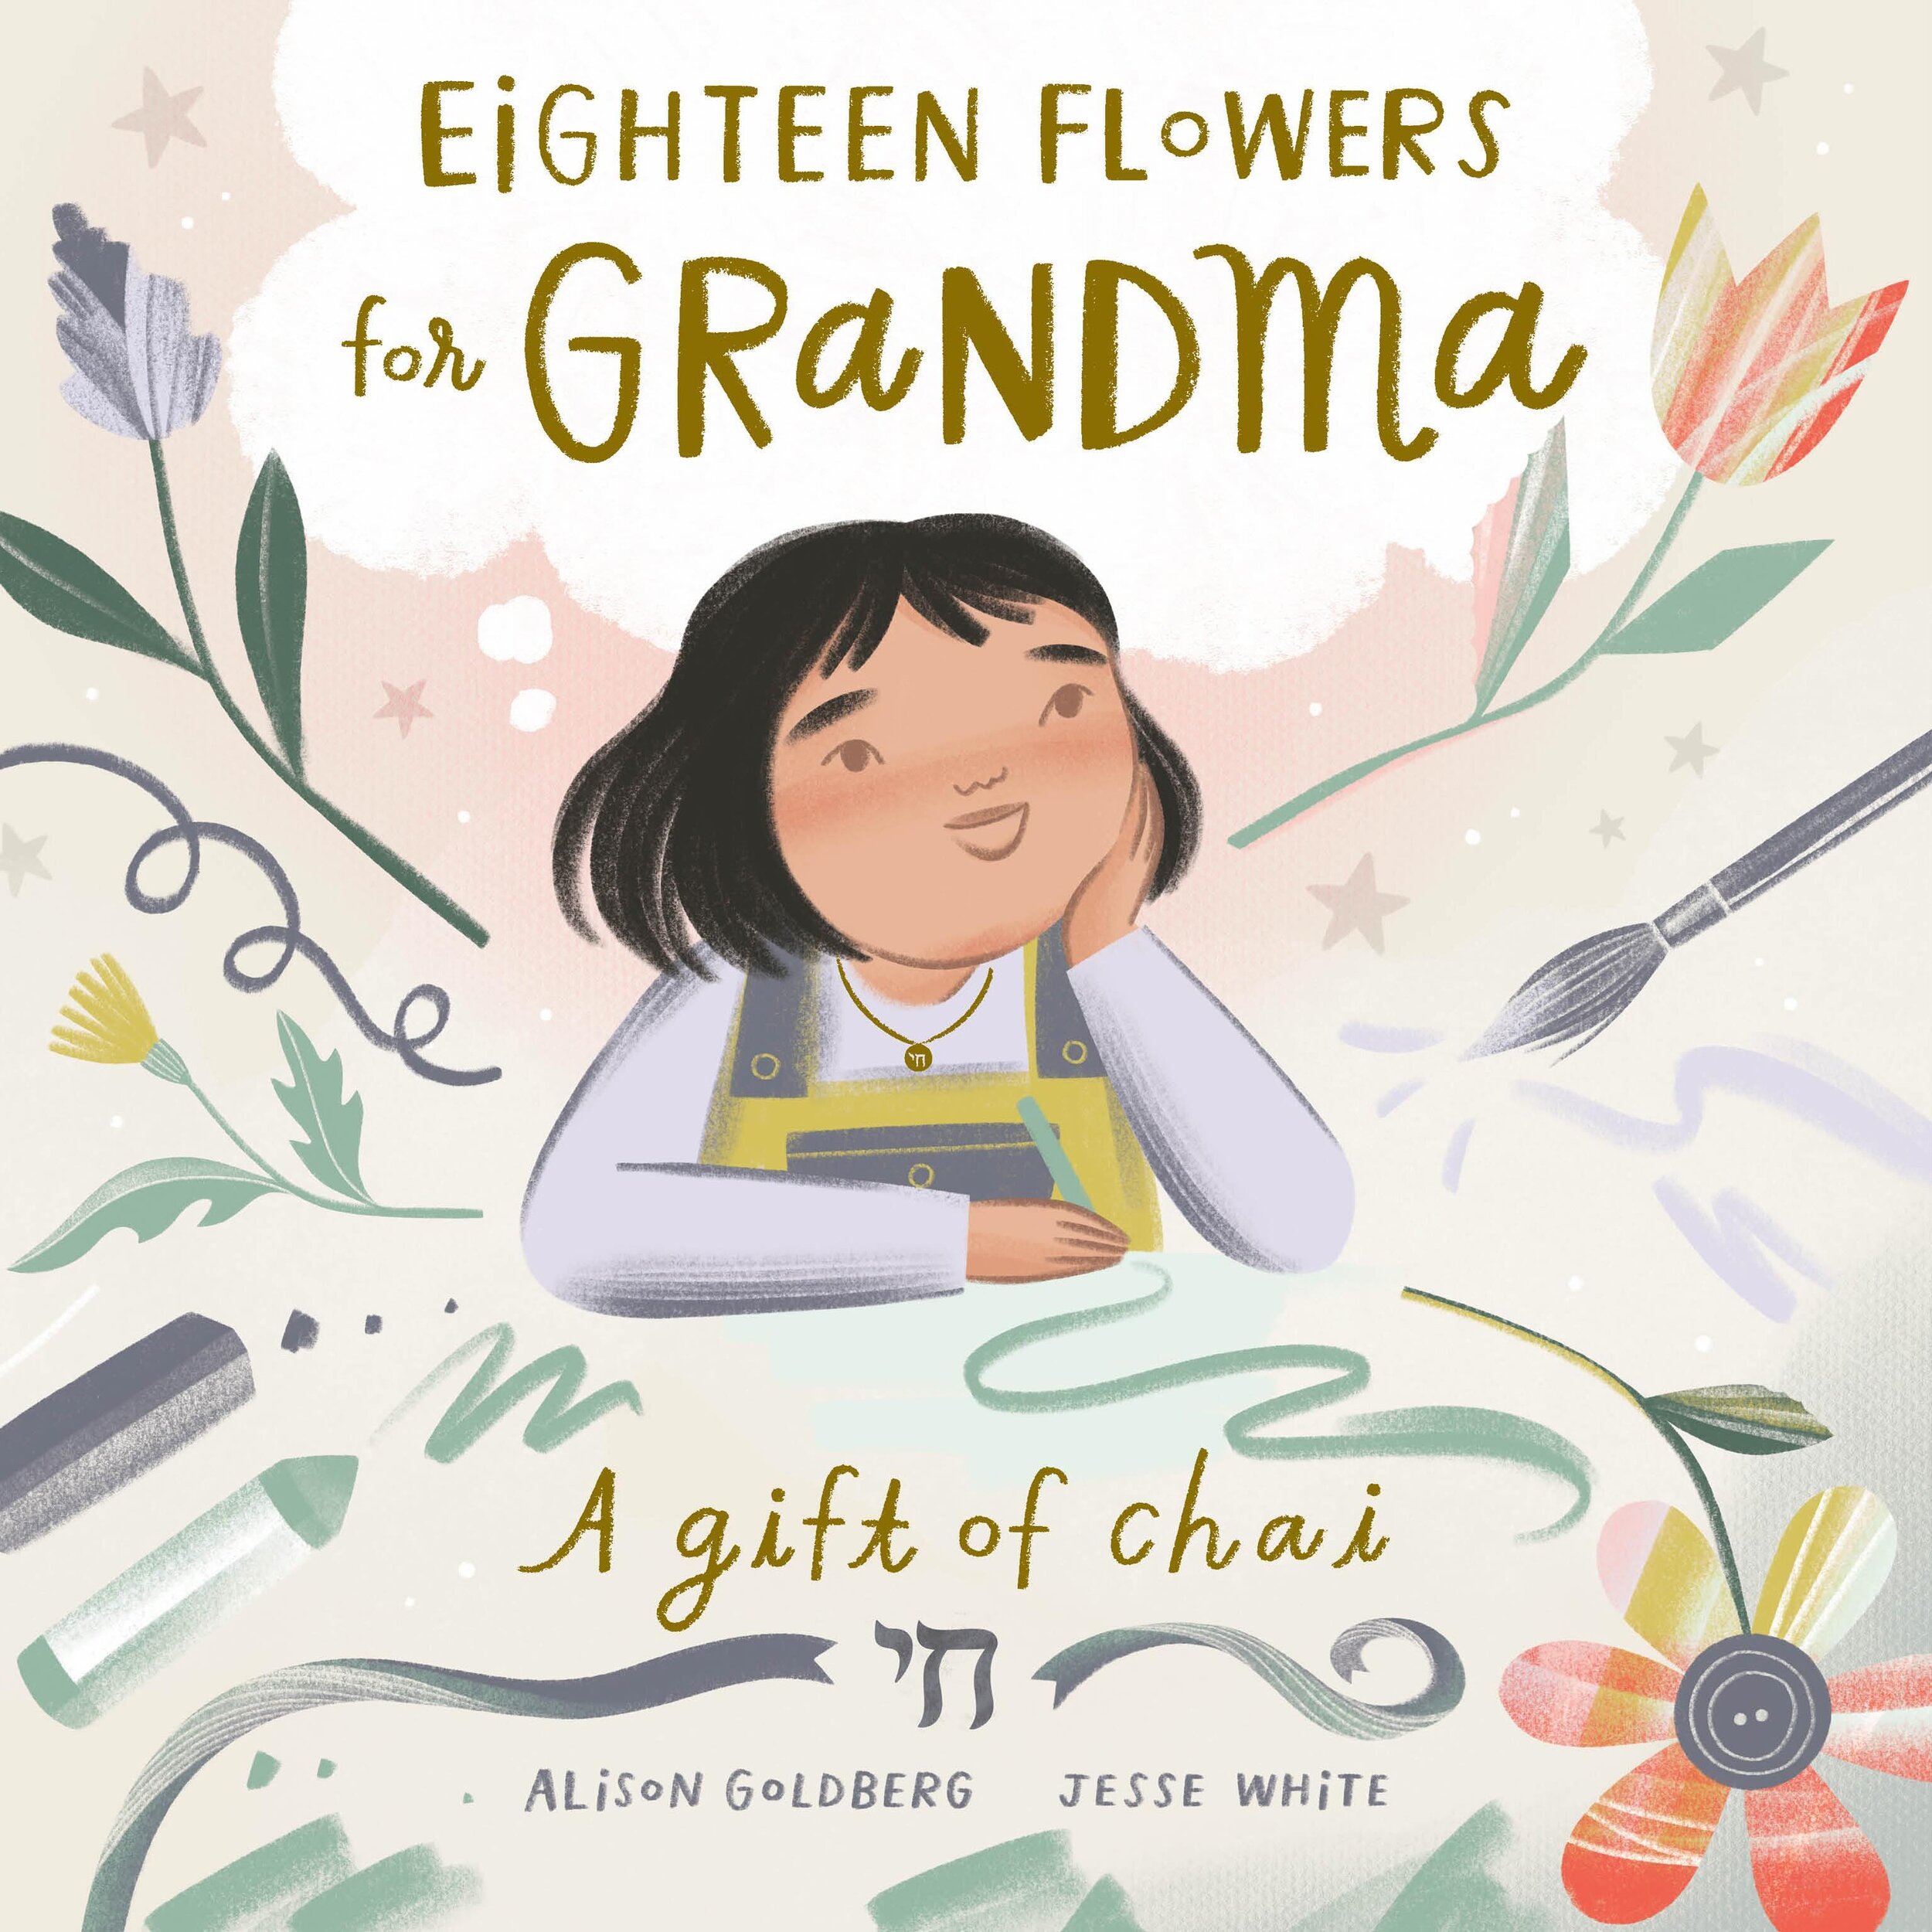 So excited to share the cover for Eighteen Flowers for Grandma: A Gift of Chai, written by @alisongoldbergbooks and illustrated by me! This book touches on so many concepts that are close to my heart: family, learning, the creative process, and the i